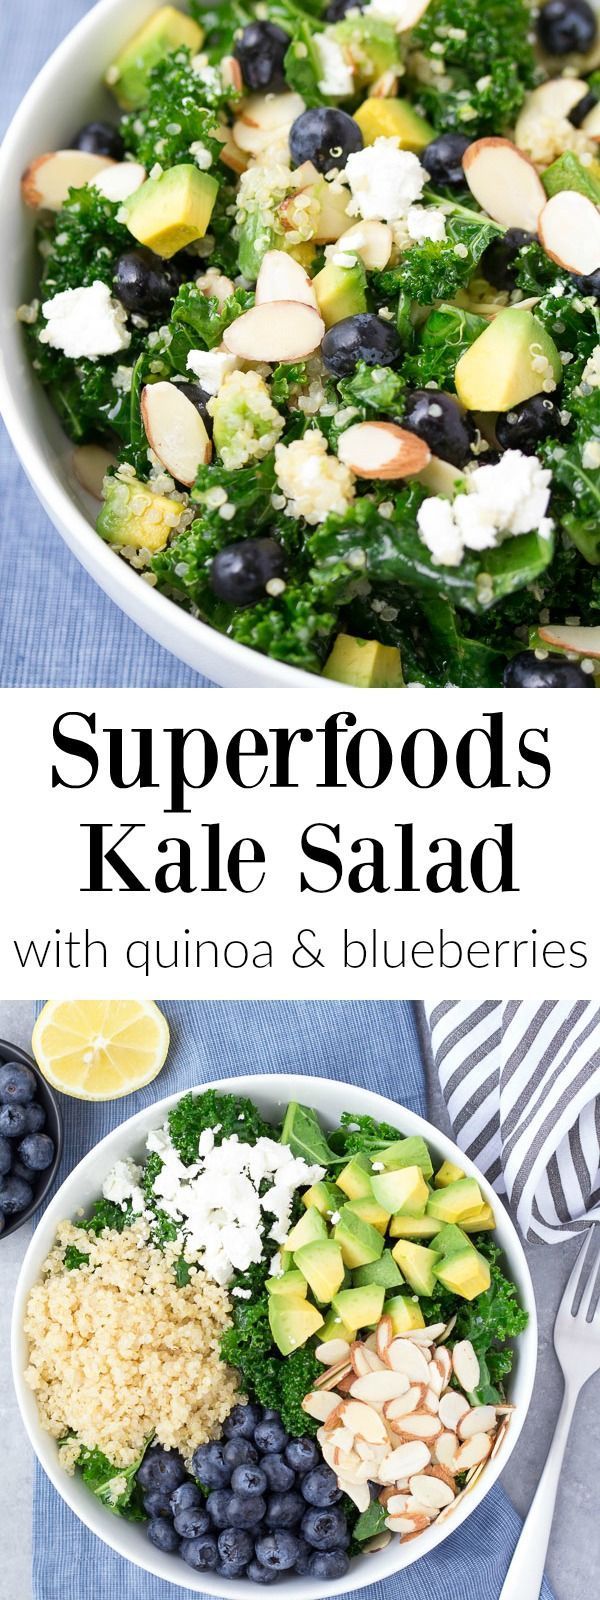 Kale Superfood Salad with Quinoa and Blueberries